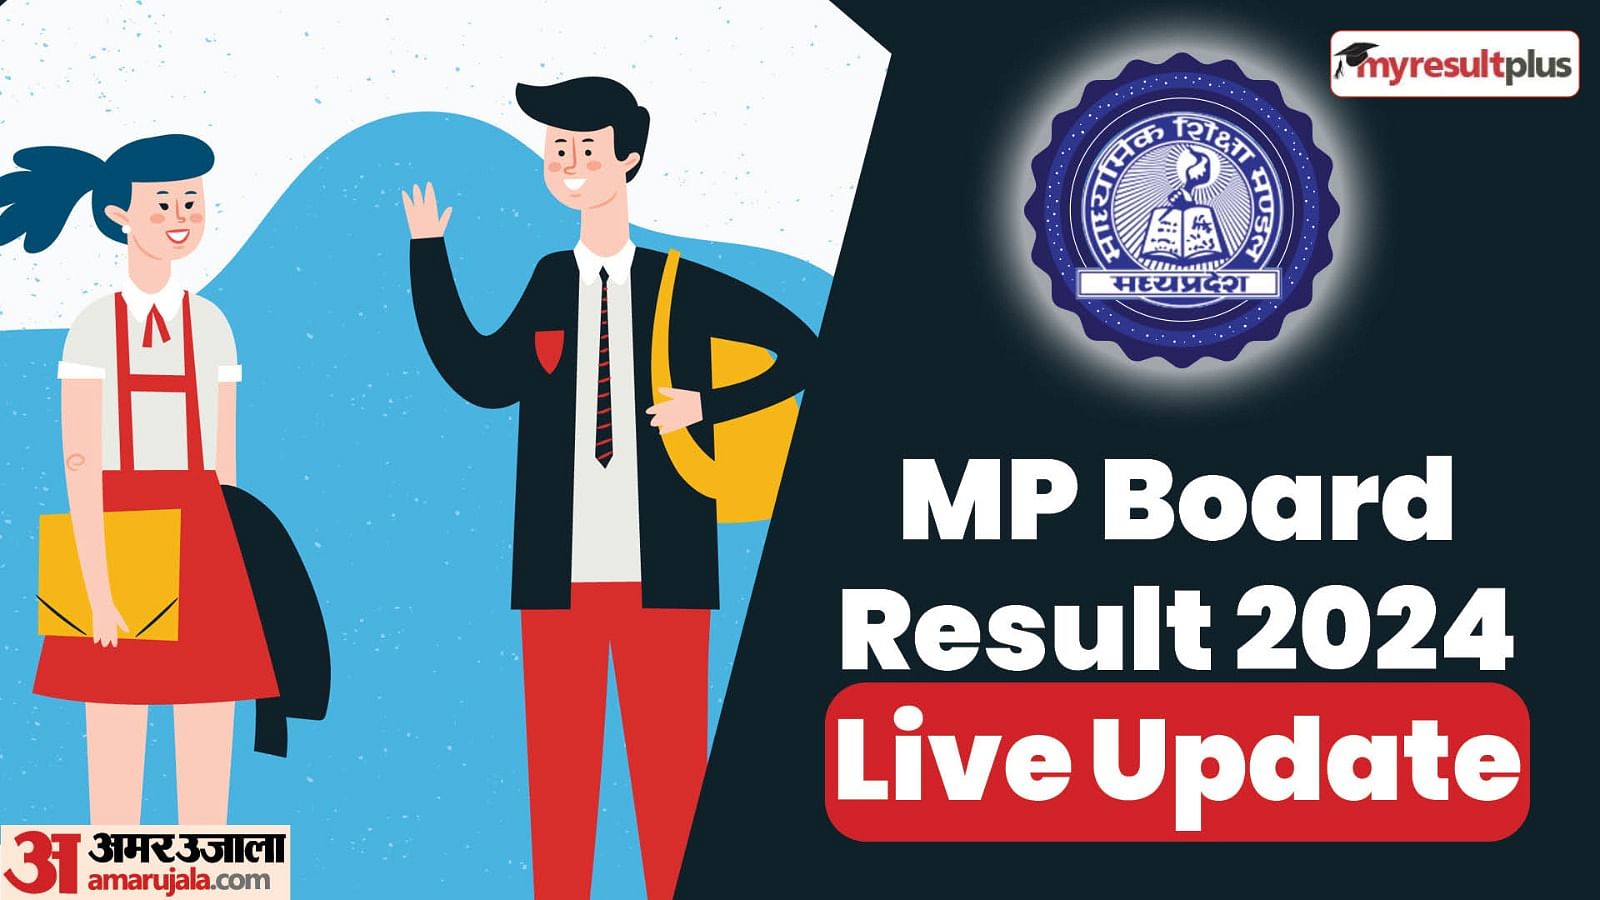 MP Board Result 2024 Live: MPBSE to release the 10th, 12th Board Results today, Check time here